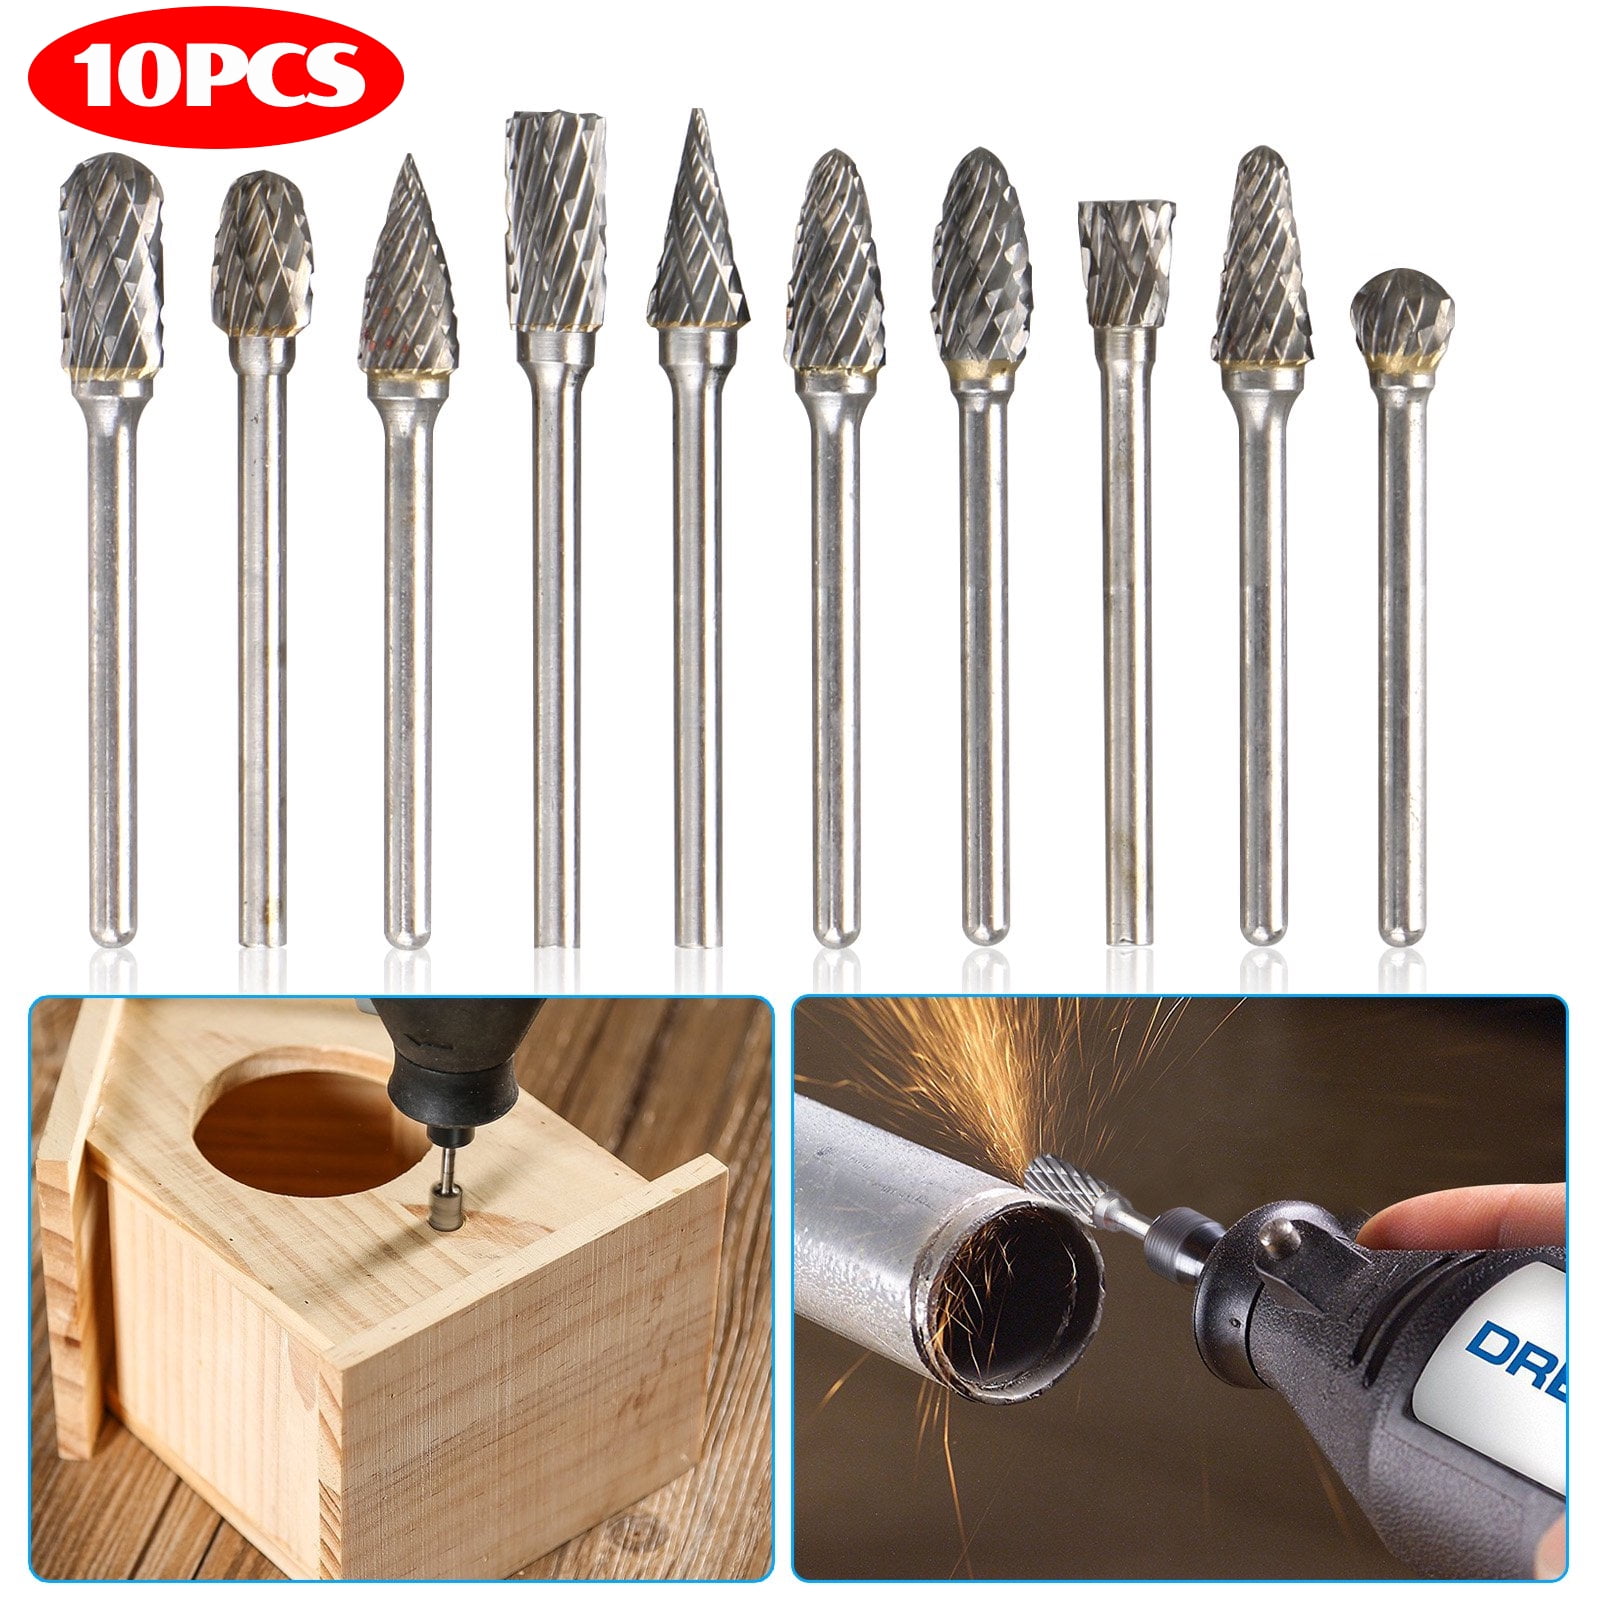 10Pcs Carbide Steel Carving Cut Drill Bits Rotary Tool 1/8" Shank Cylinder Shape 